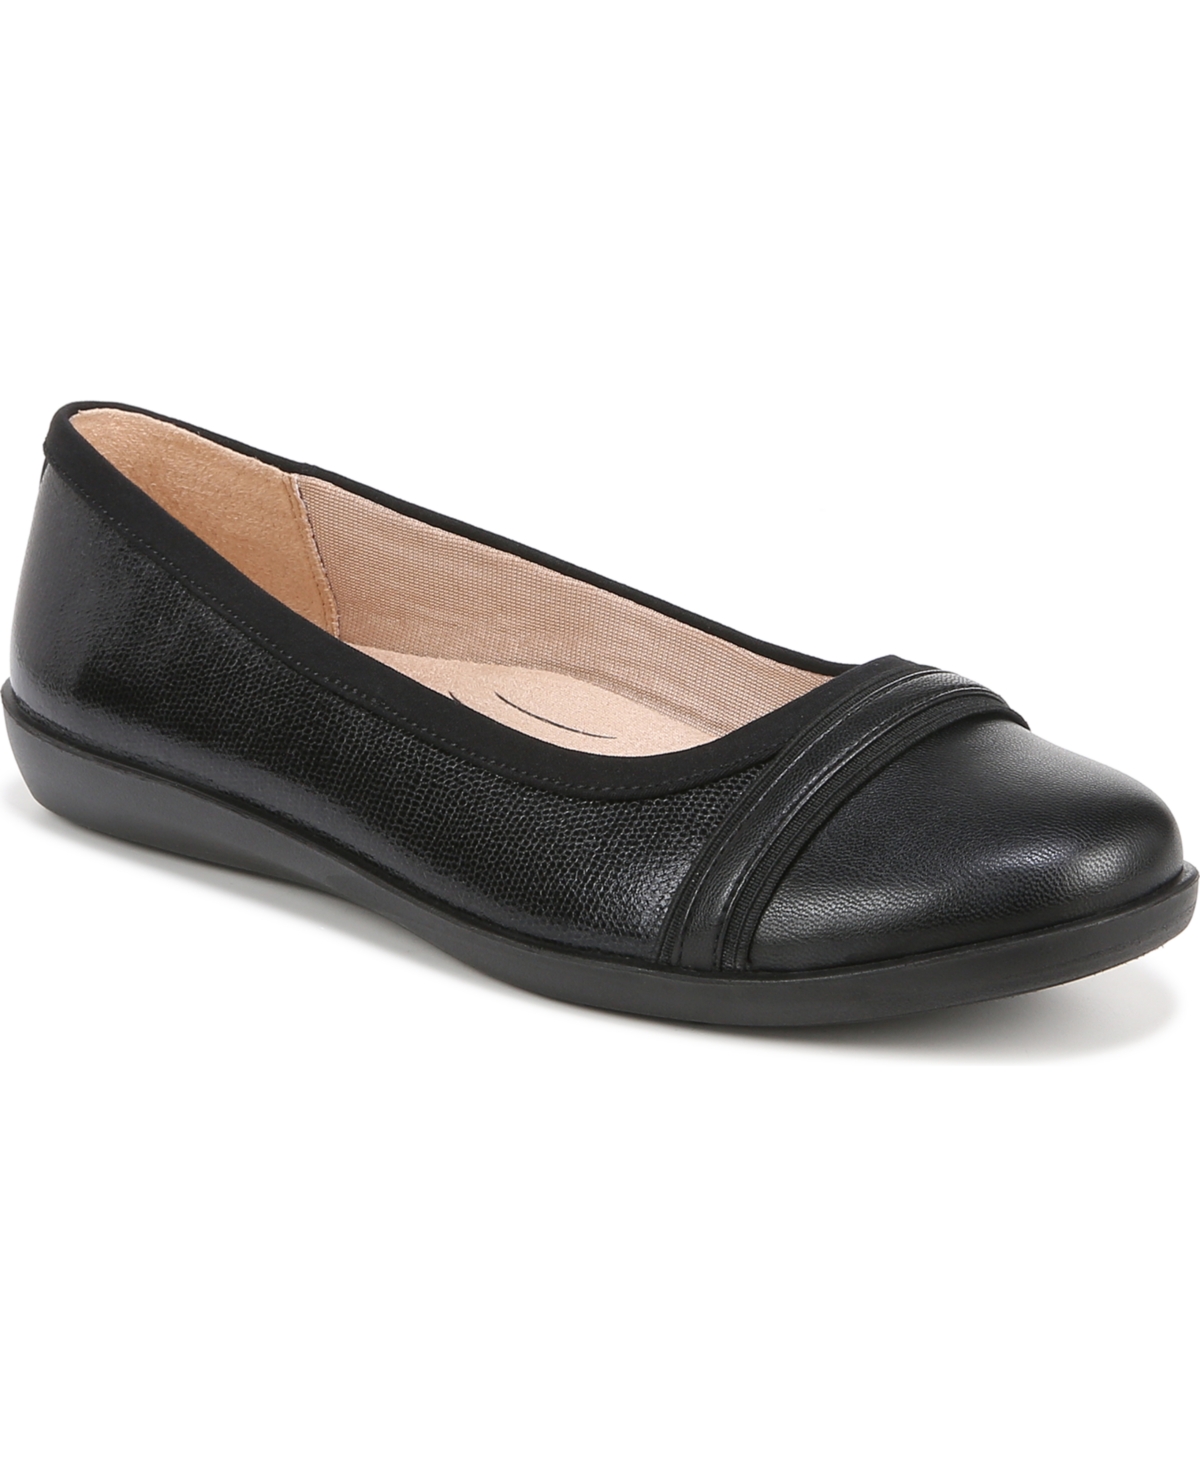 Nile Ballet Flats - Tender Taupe Faux Leather